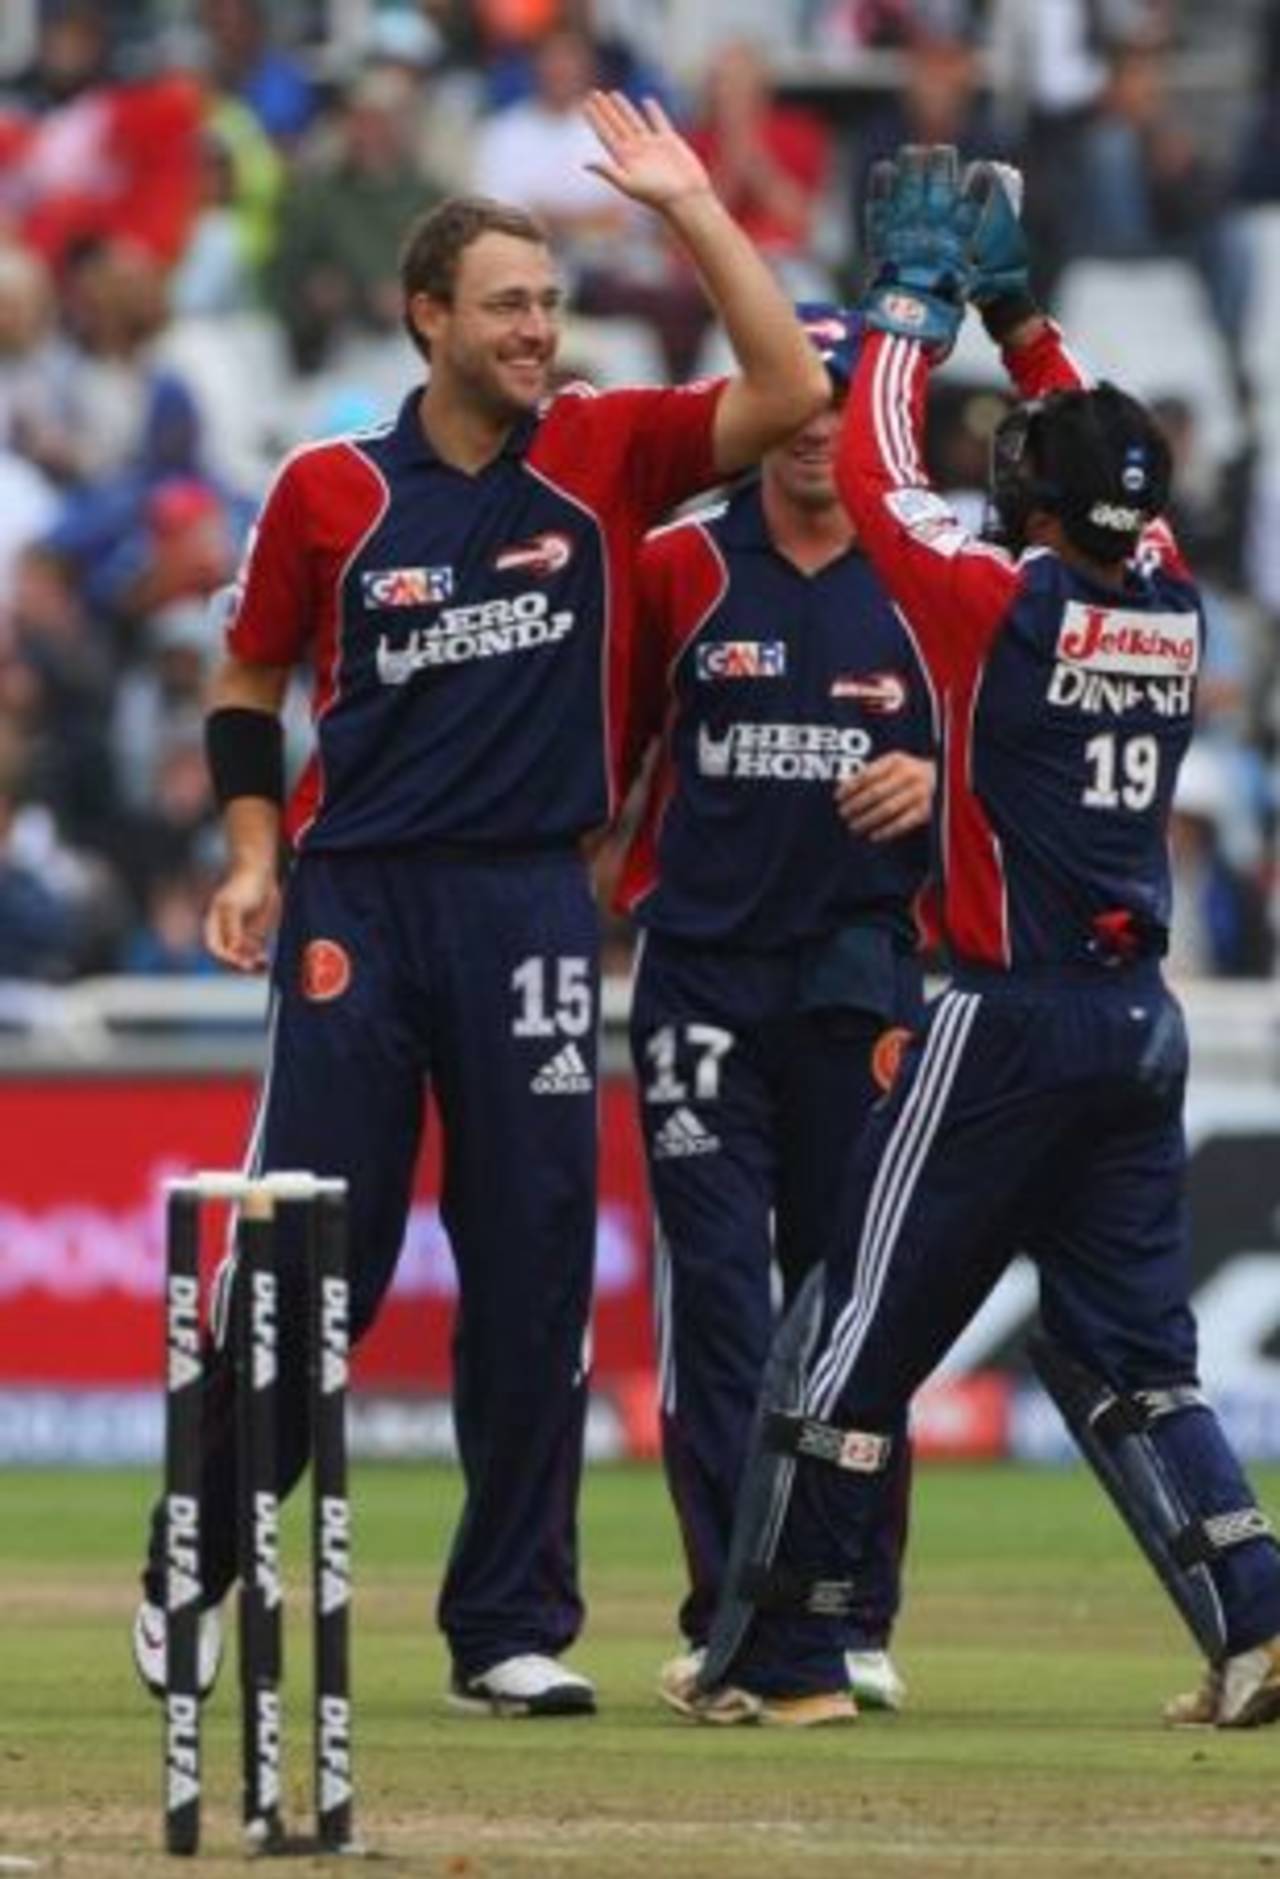 Daniel Vettori is all smiles after taking a wicket, Delhi Daredevils v Kings XI Punjab, IPL, 3rd game, Cape Town, April 19, 2009